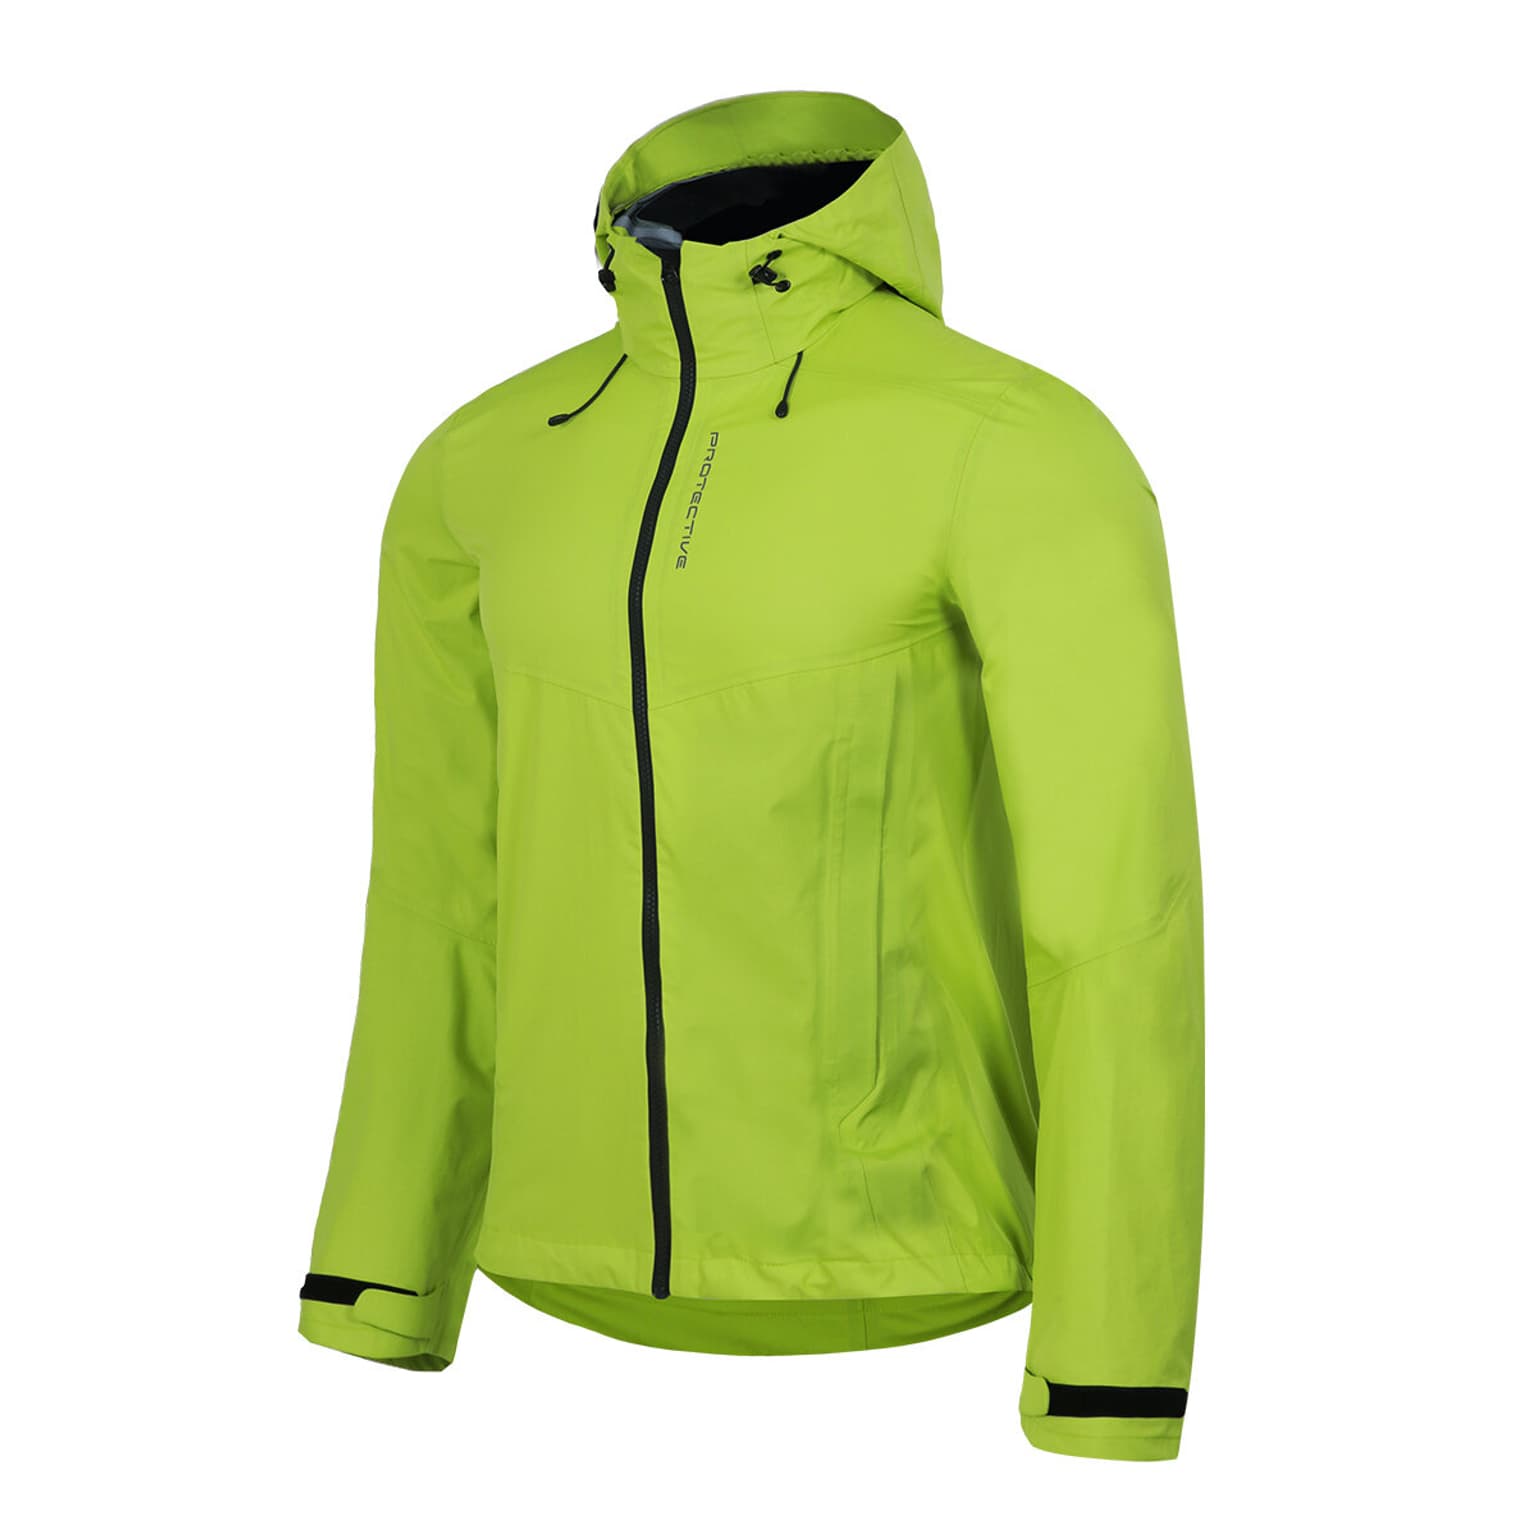 Protective Protective P- NEW AGE PRO Regenjacke lime 1